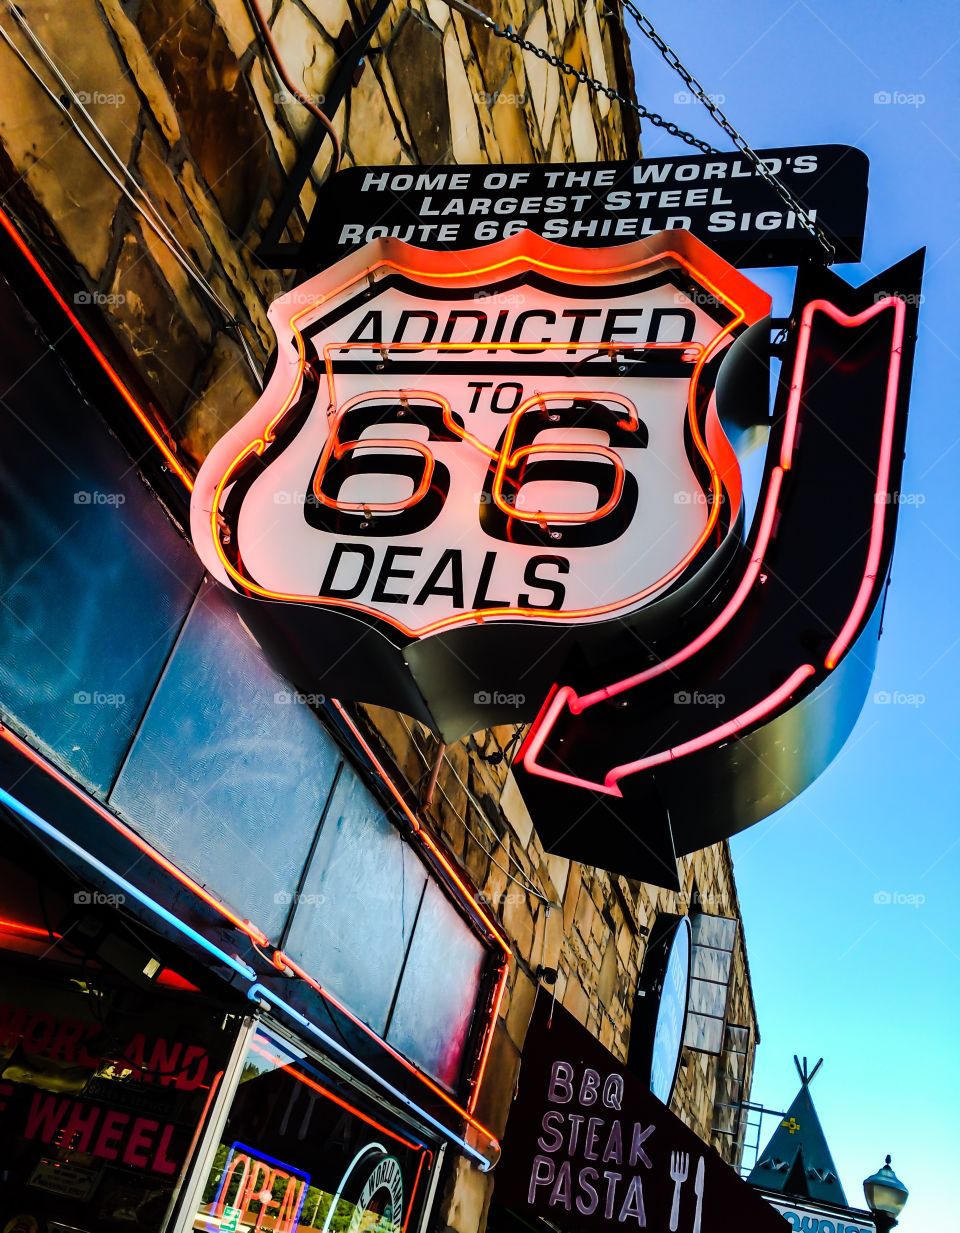 Get your deals on route 66.